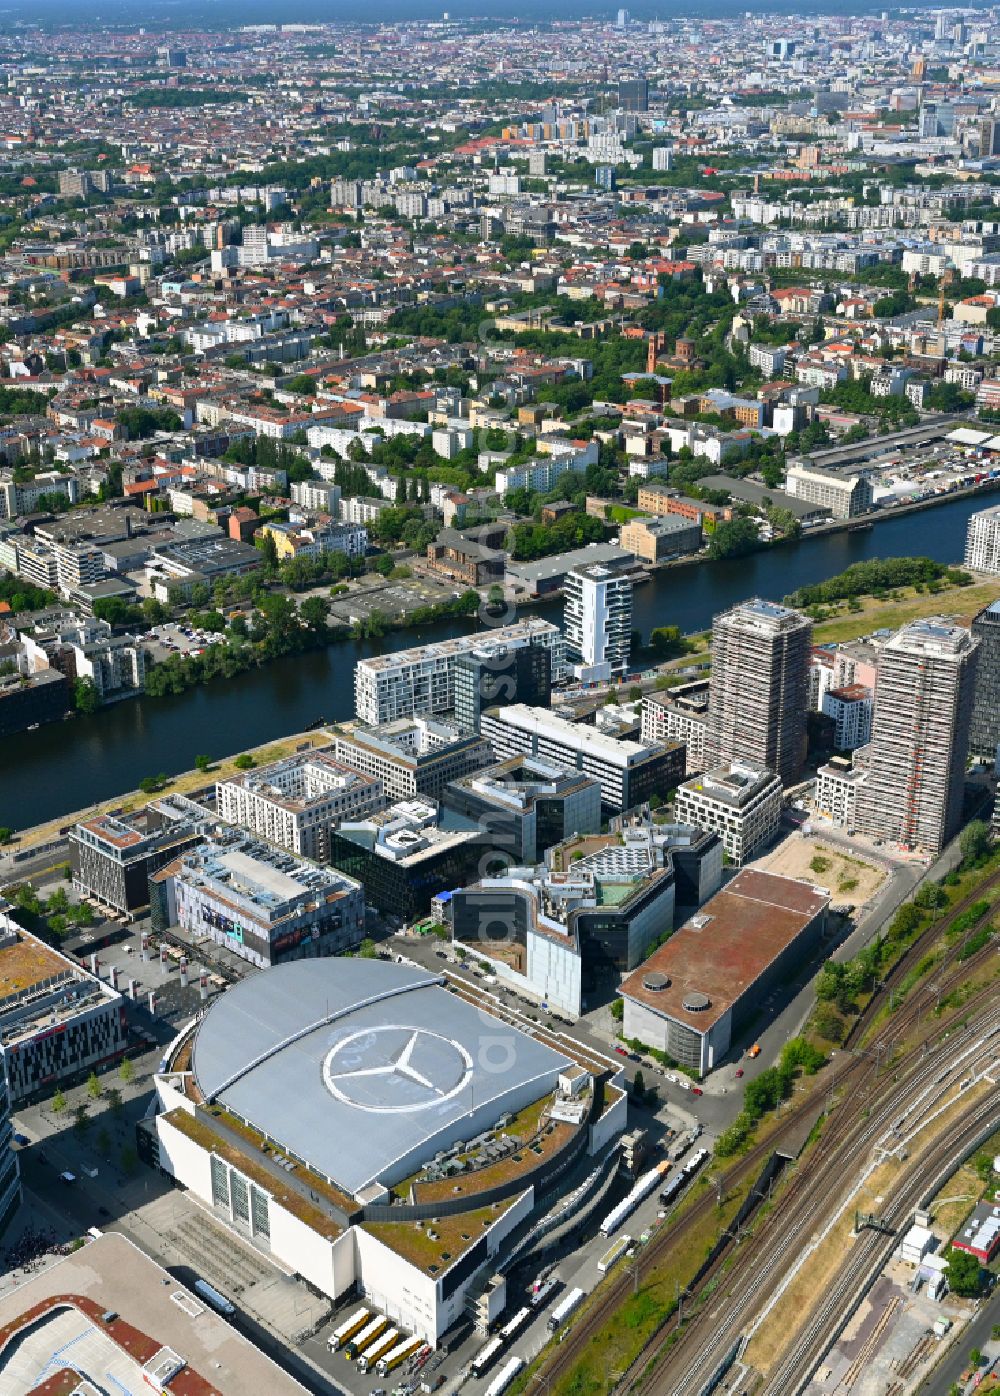 Berlin from the bird's eye view: Arena Mercedes-Benz-Arena on Friedrichshain part of Berlin. The former O2 World - now Mercedes-Benz-Arena - is located in the Anschutz Areal, a business and office space on the riverbank